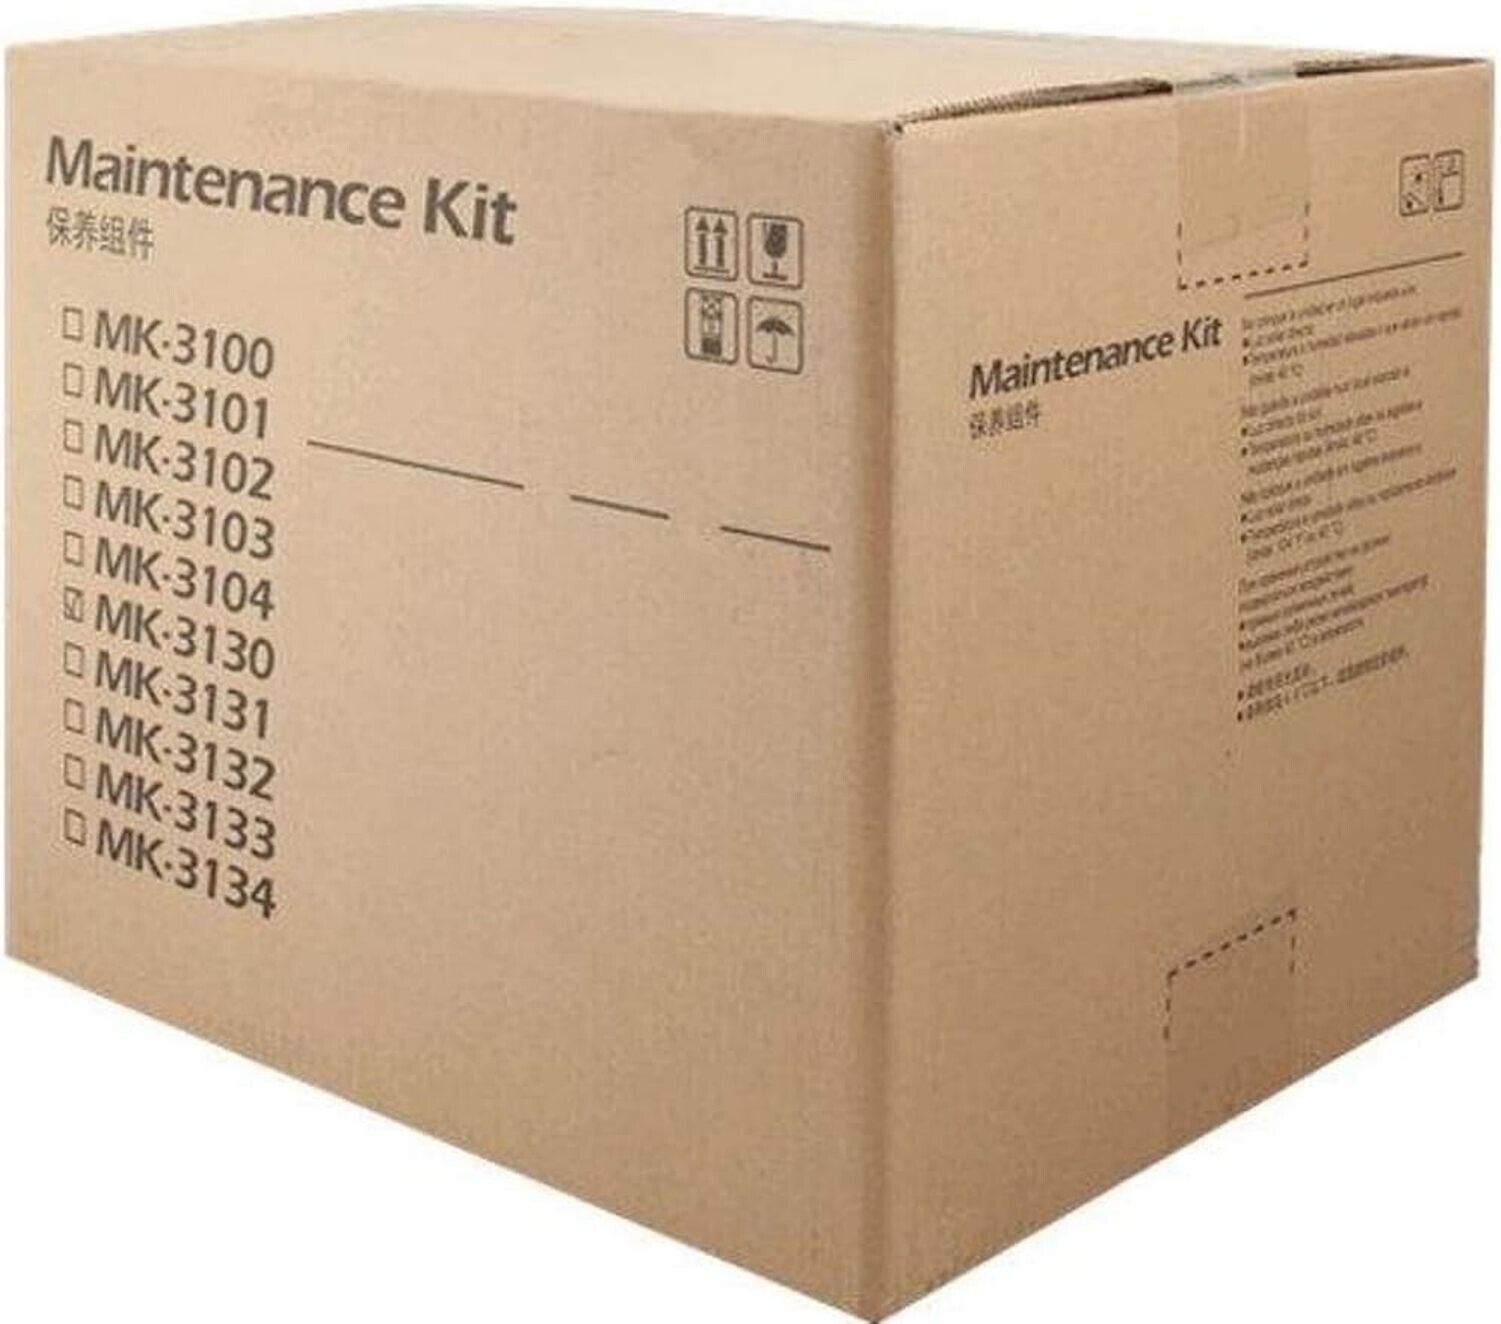 Kyocera 1702MS7US0 Model MK-3102 Maintenance Kit, Up to 300000 Pages Yield